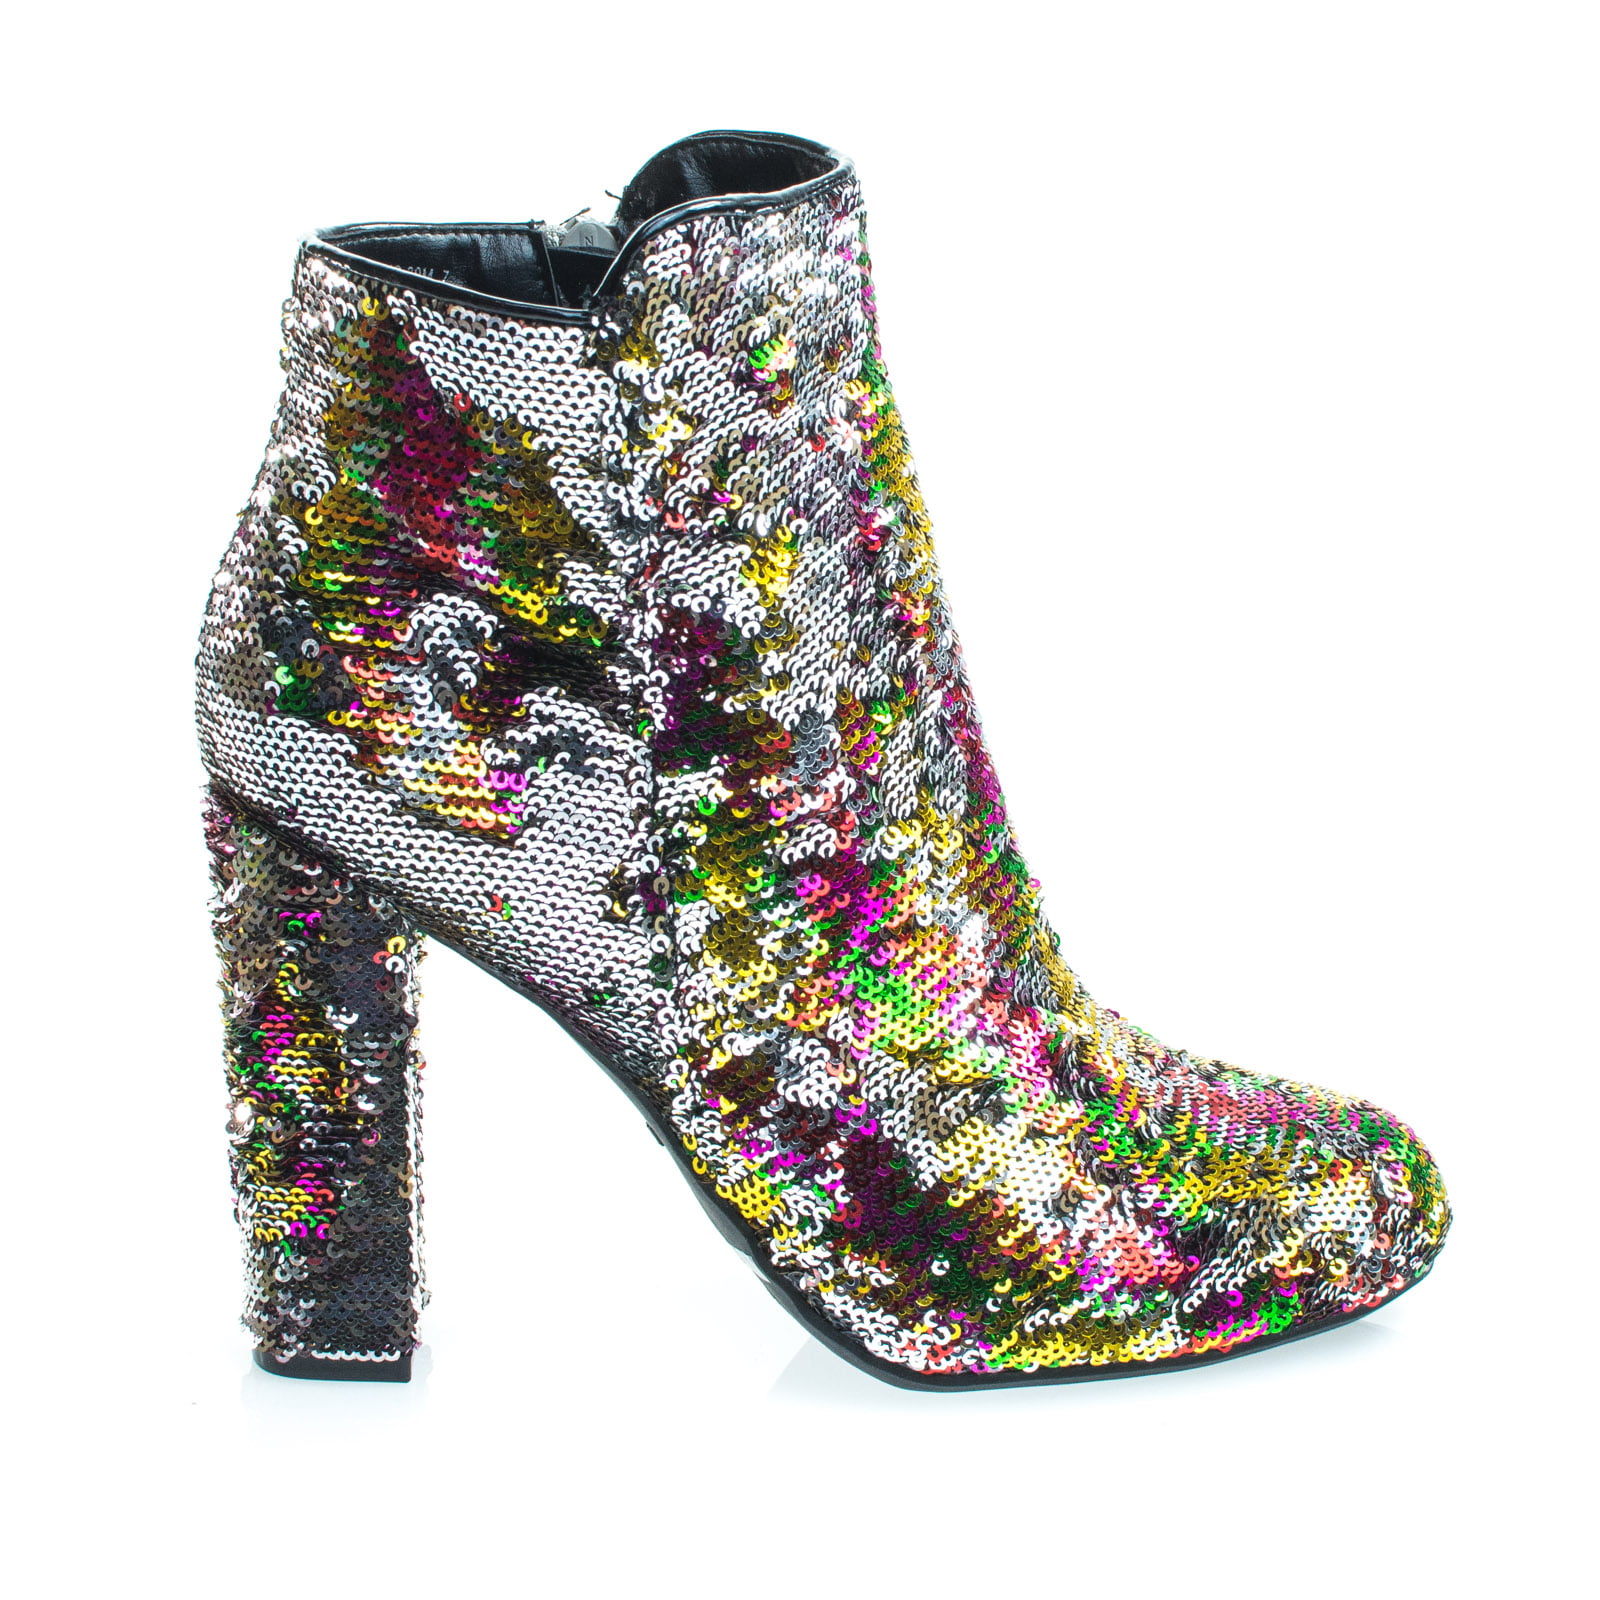 Vintage Booties Sequin Embroidered Block Heel Round Toe Shoes Boots